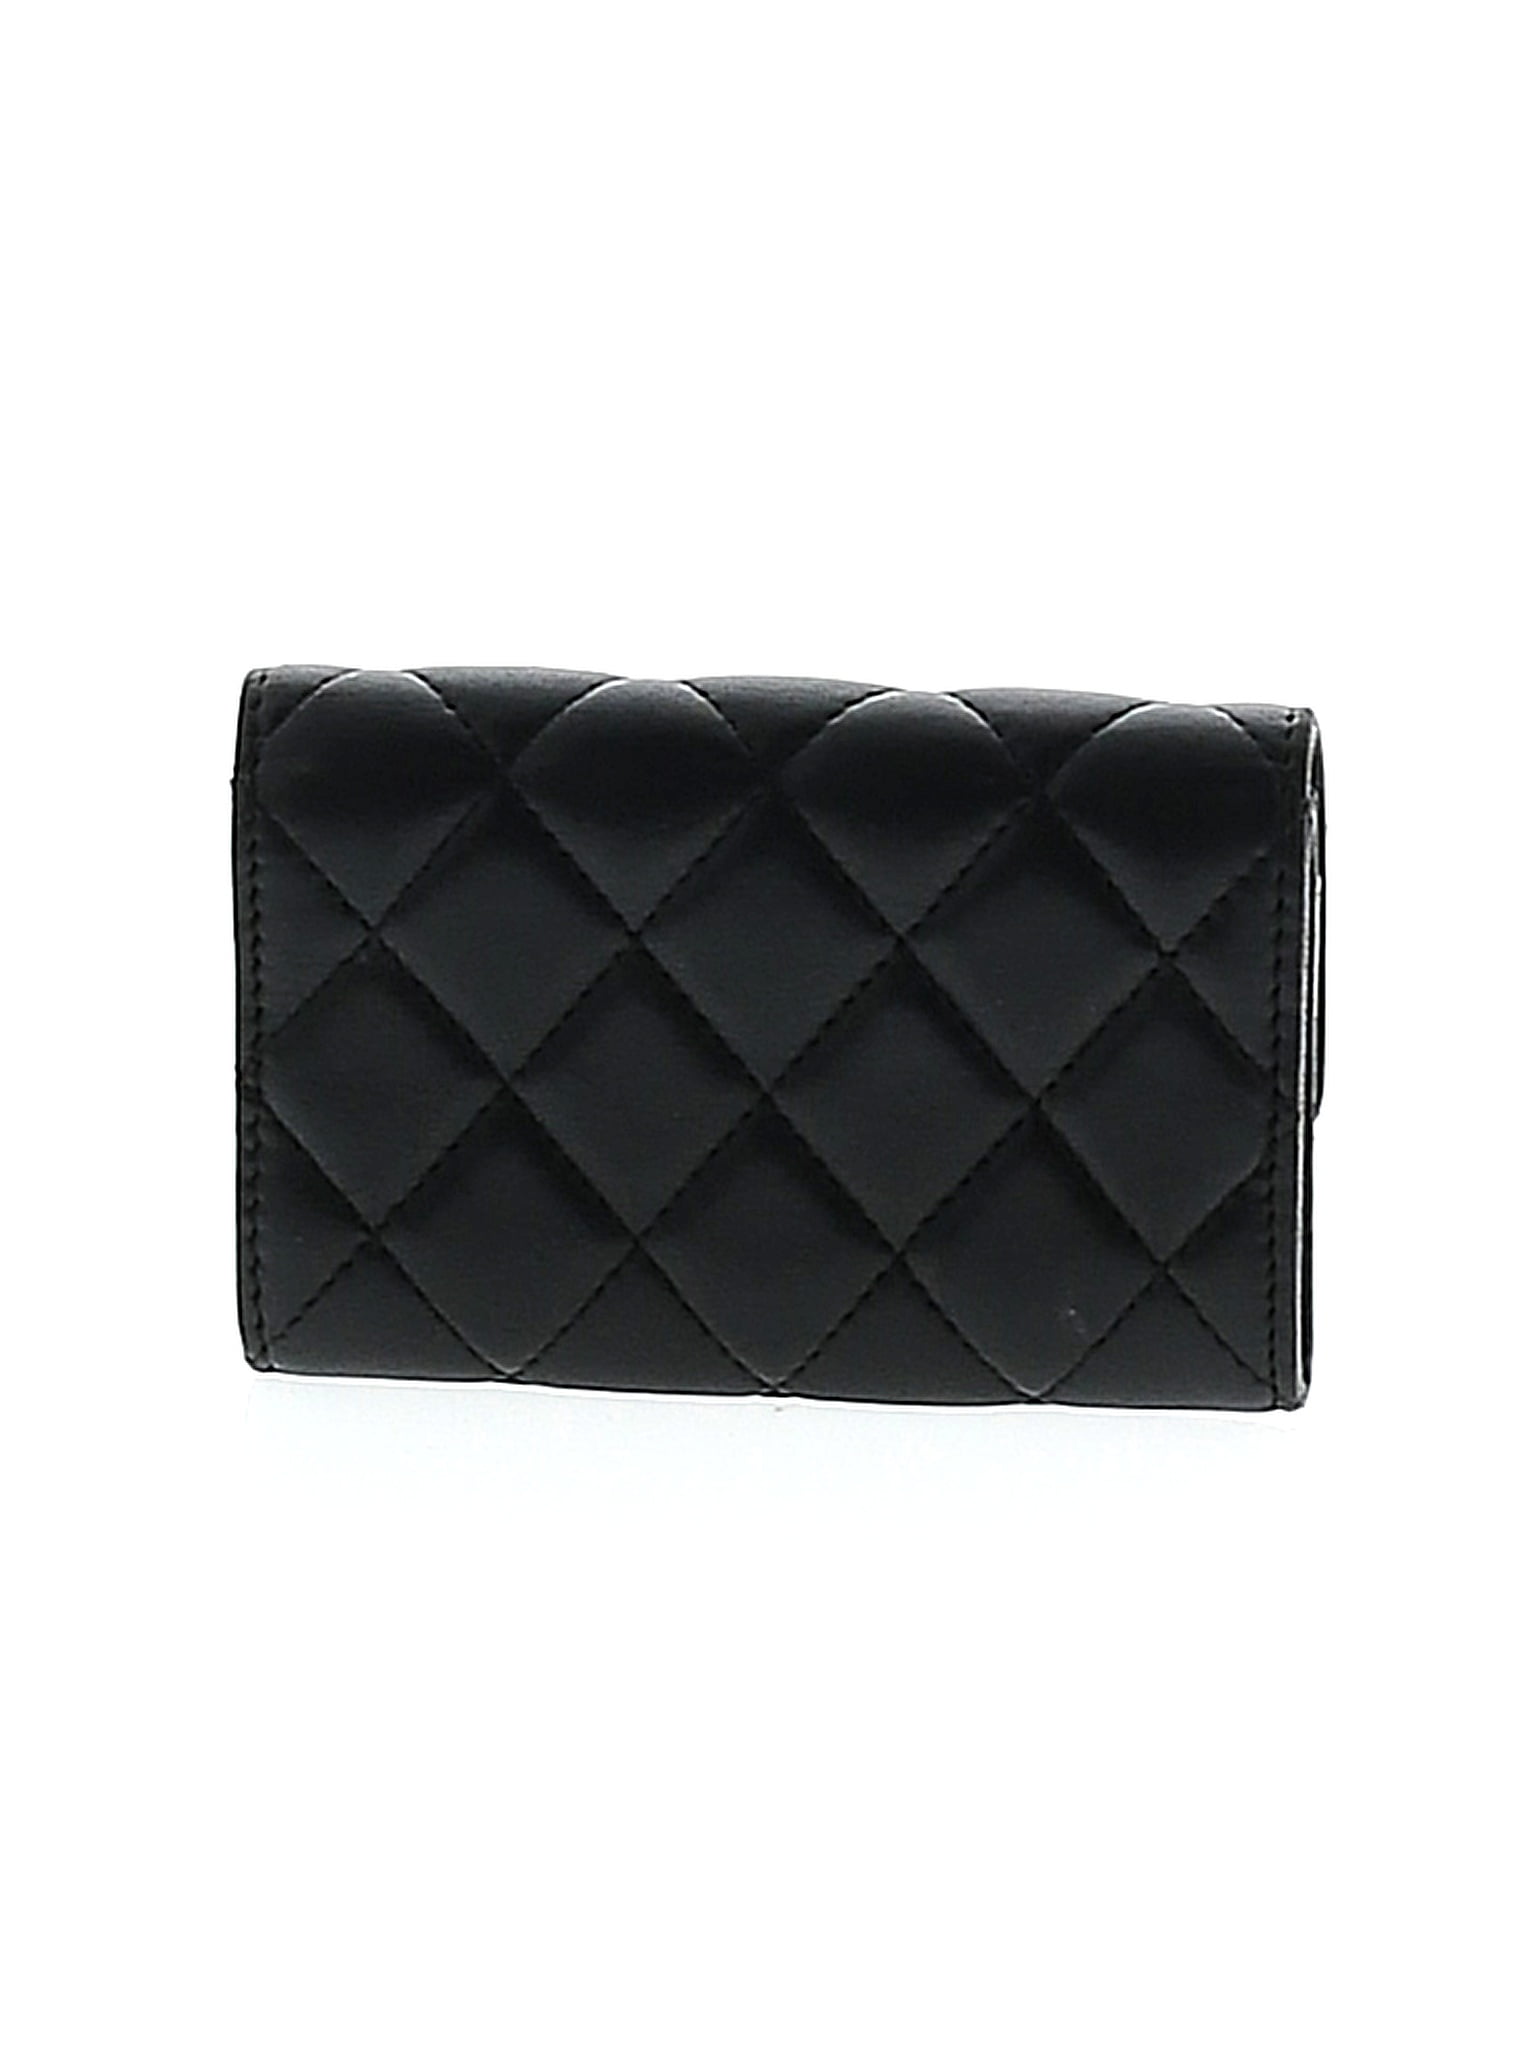 Chanel Designer Handbags On Sale Up To 90% Off Retail